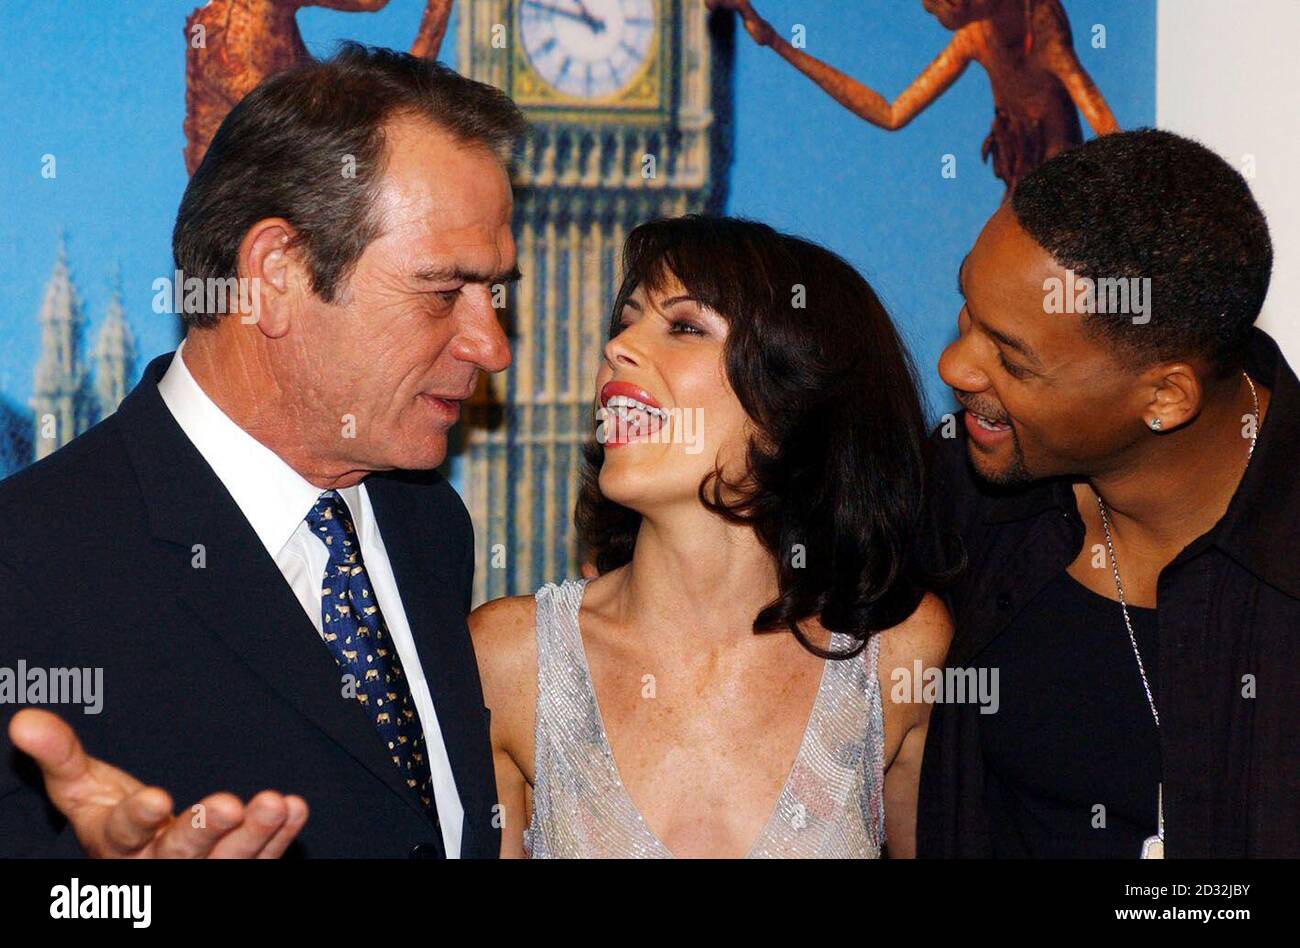 Actress Lara Flynn Boyle flanked by actors Tommy Lee Jones (left) and Will Smith during a photocall at the BAFTA offices in London's Piccadilly, to promote their new film 'Men In Black 2'. 22/07/02 : Lara Flynn Boyle, with actors Tommy Lee Jones (left) and Will Smith (right). Men in Black II star Lara has said she felt she was in her prime at 32 and was not looking forward to ageing. The actress, who shot to fame in director David Lynch's cult television series Twin Peaks, said she felt that Hollywood still favoured women in their 20s. I know I may be running out of time. There are just not Stock Photo